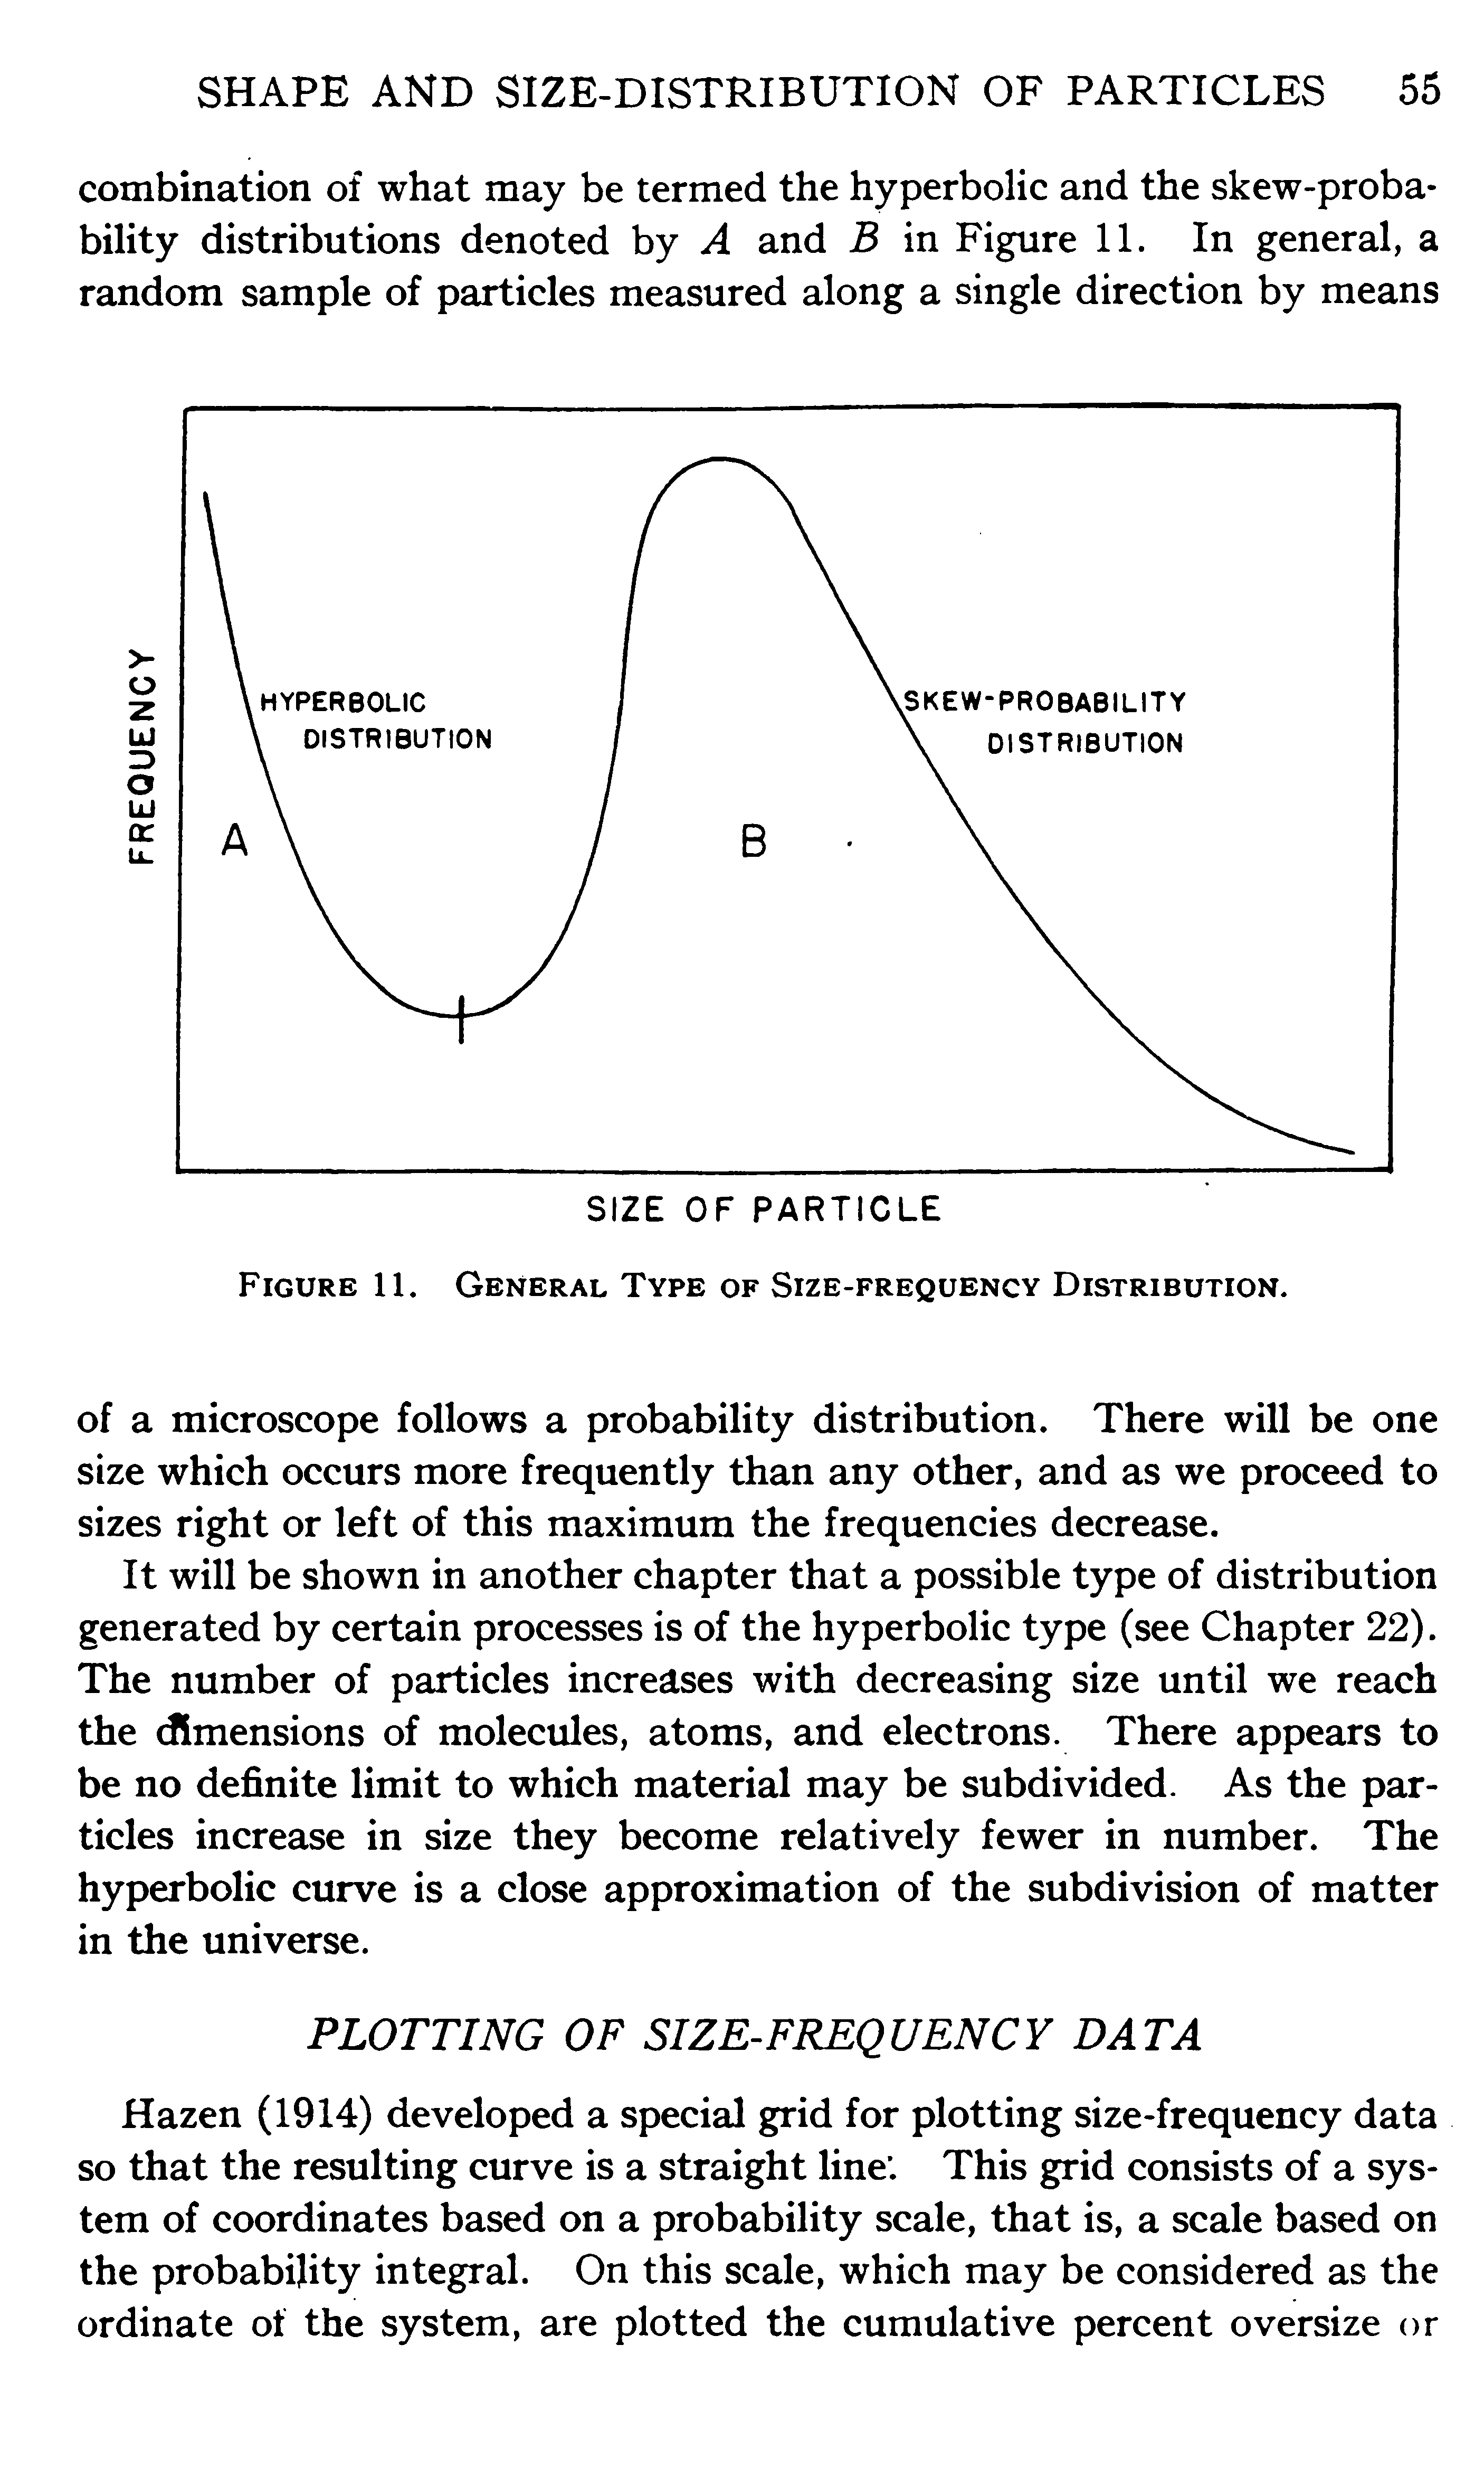 Figure 11. General Type of Size-frequency Distribution.